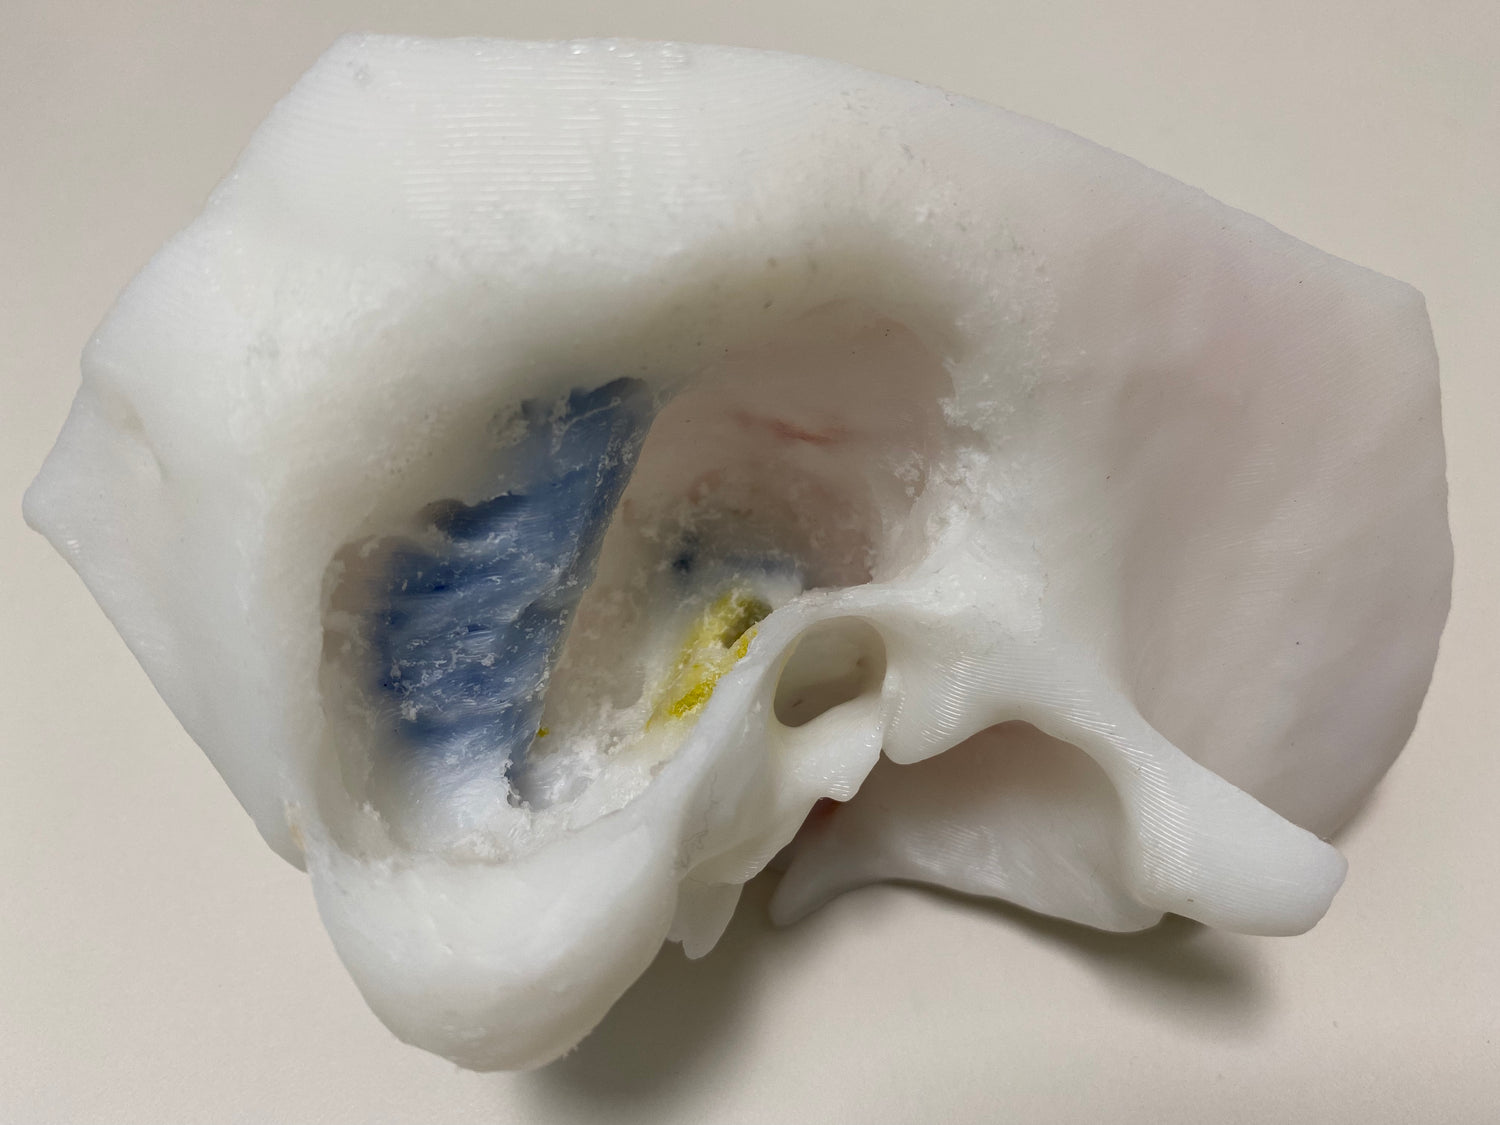 Cortical mastoidectomy and facial recess on 3D printed temporal bone.